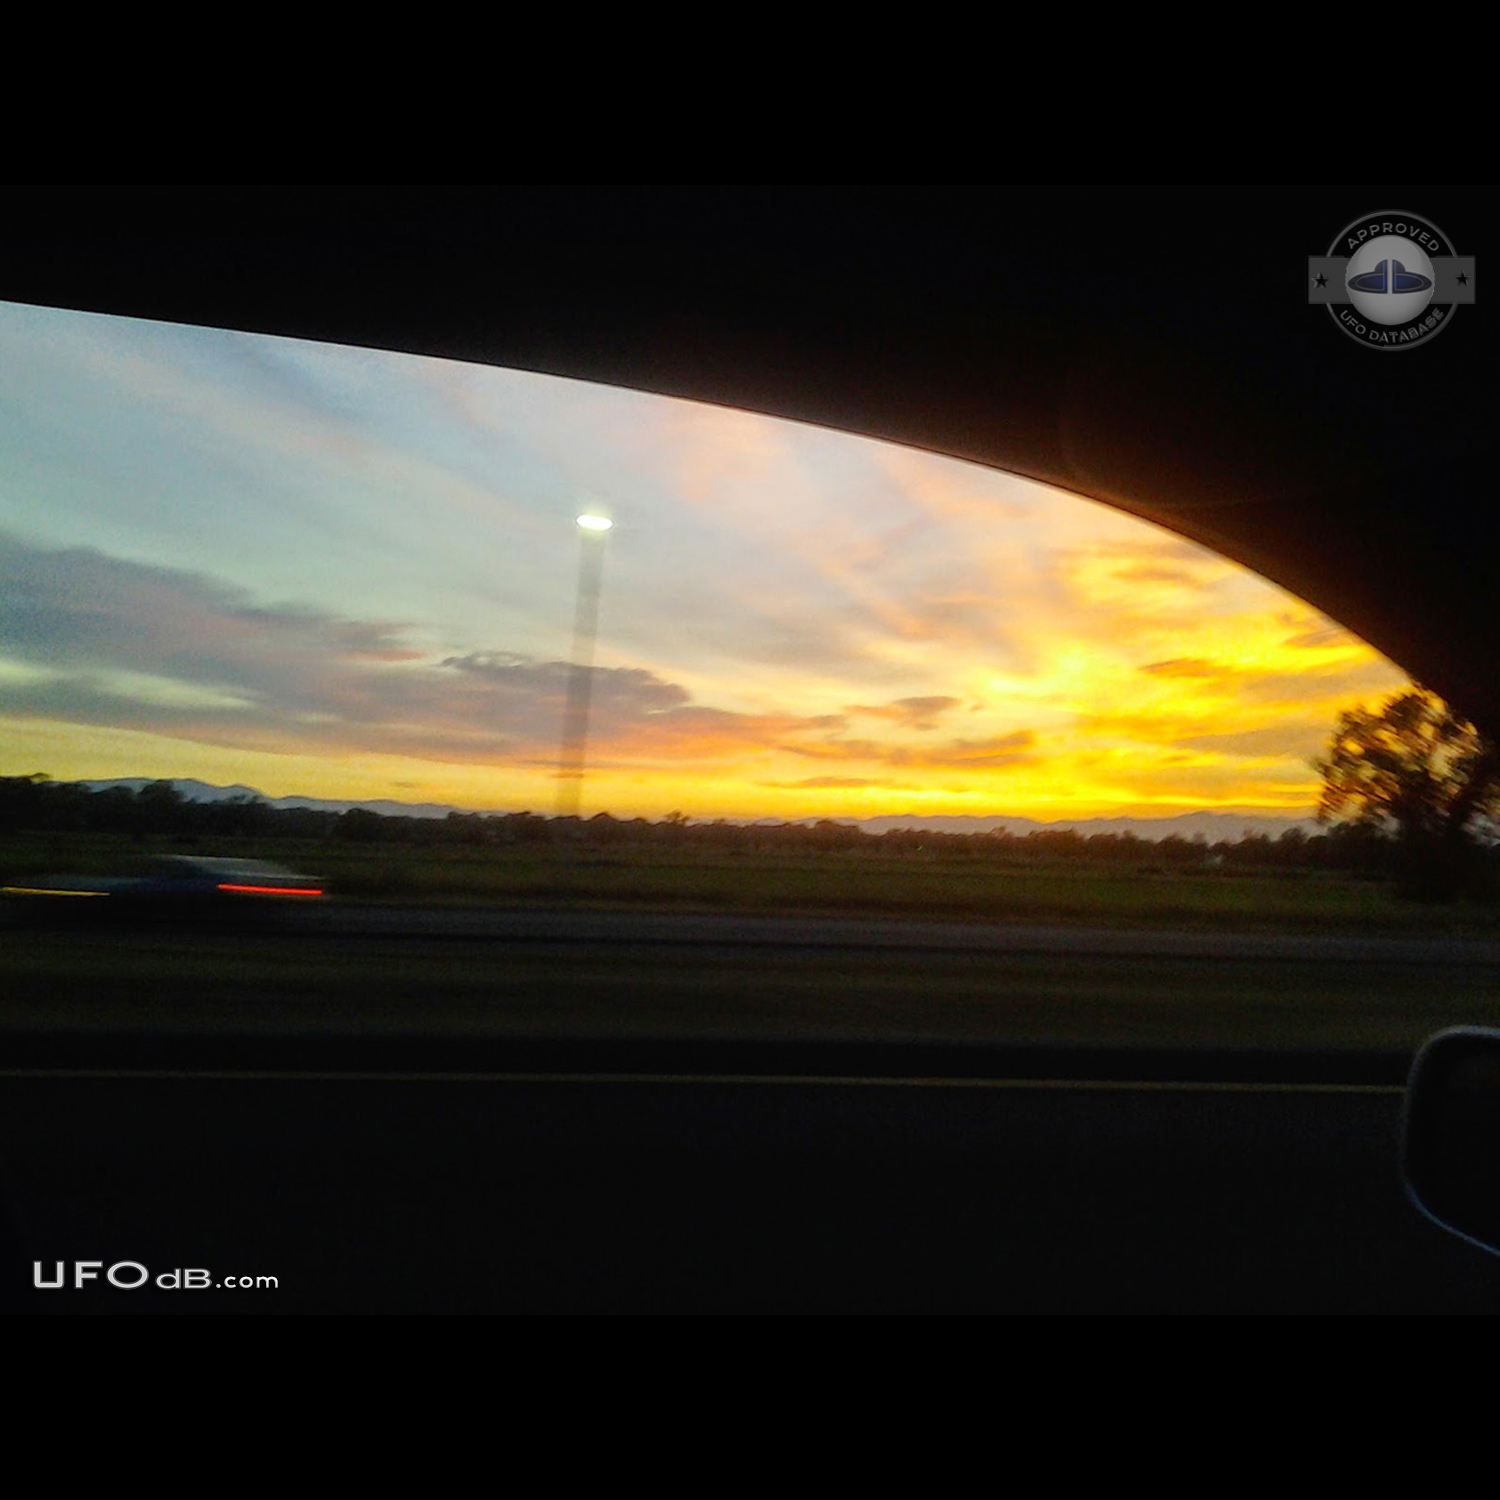 UFO saucer caught from car in Cottonwood California USA 2014 UFO Picture #589-1